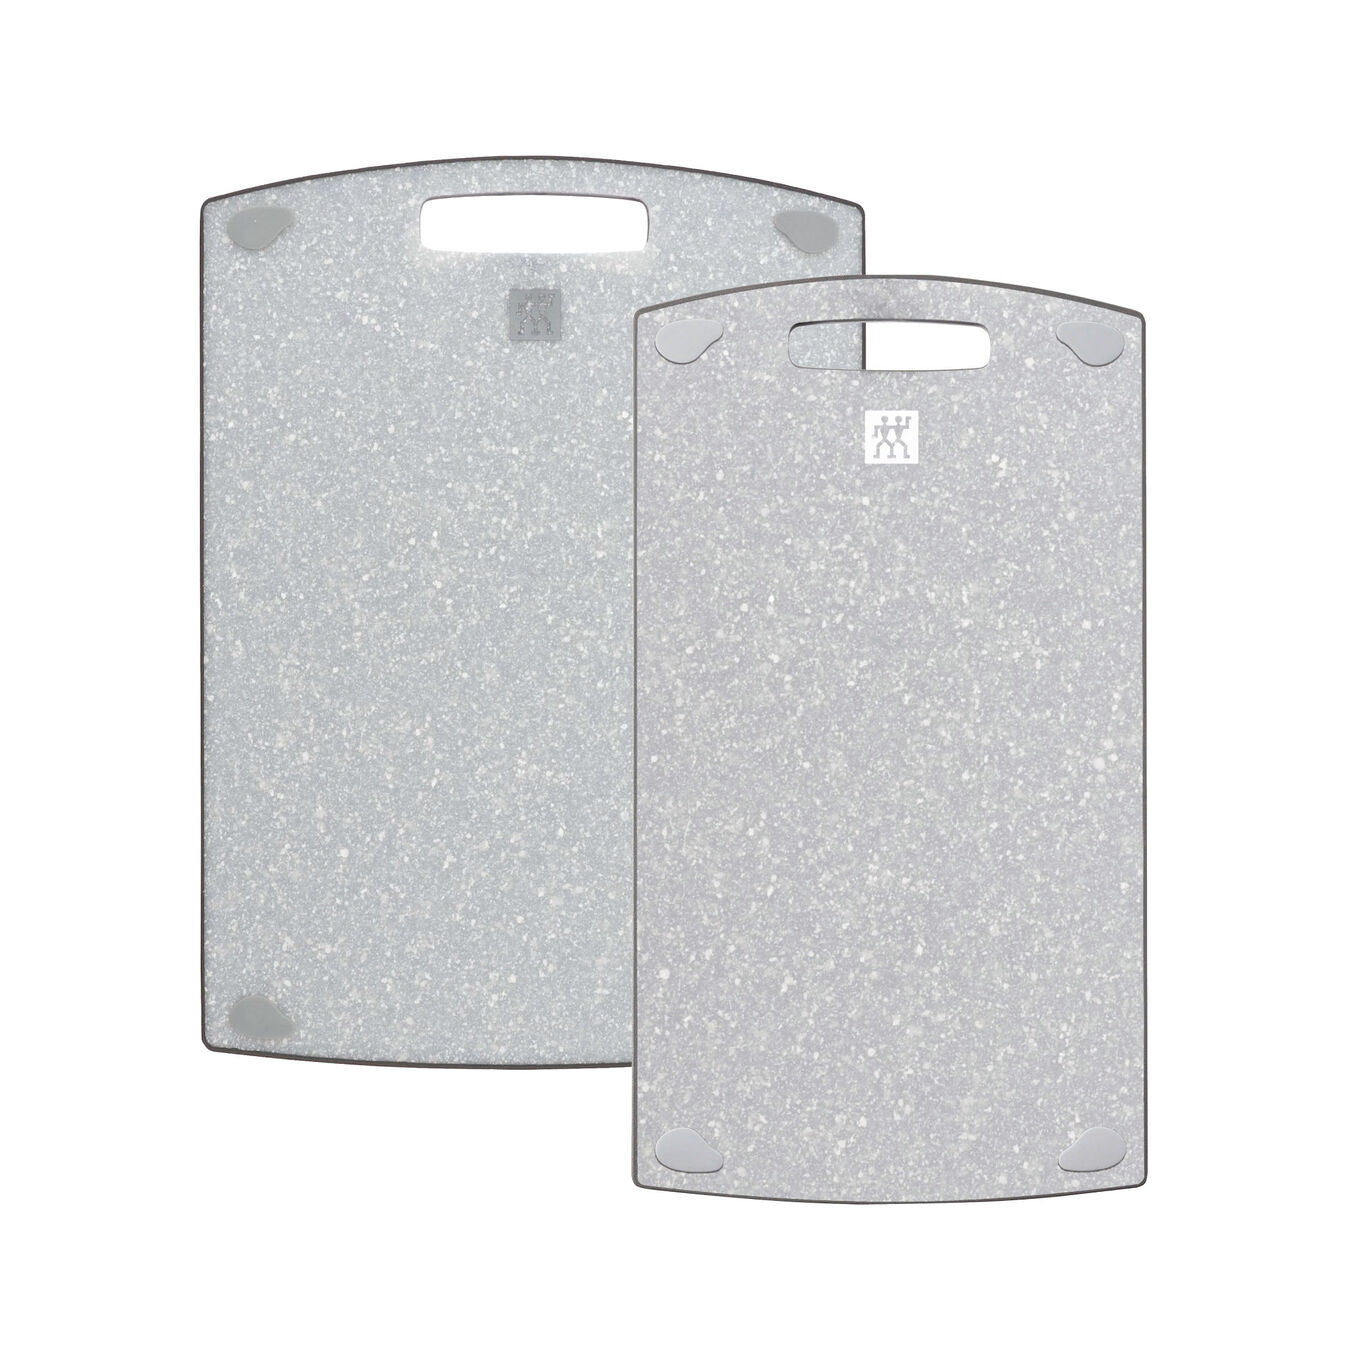 MARBLE SPECKLED BOARD SET 2 Piece, plastic,,large 5